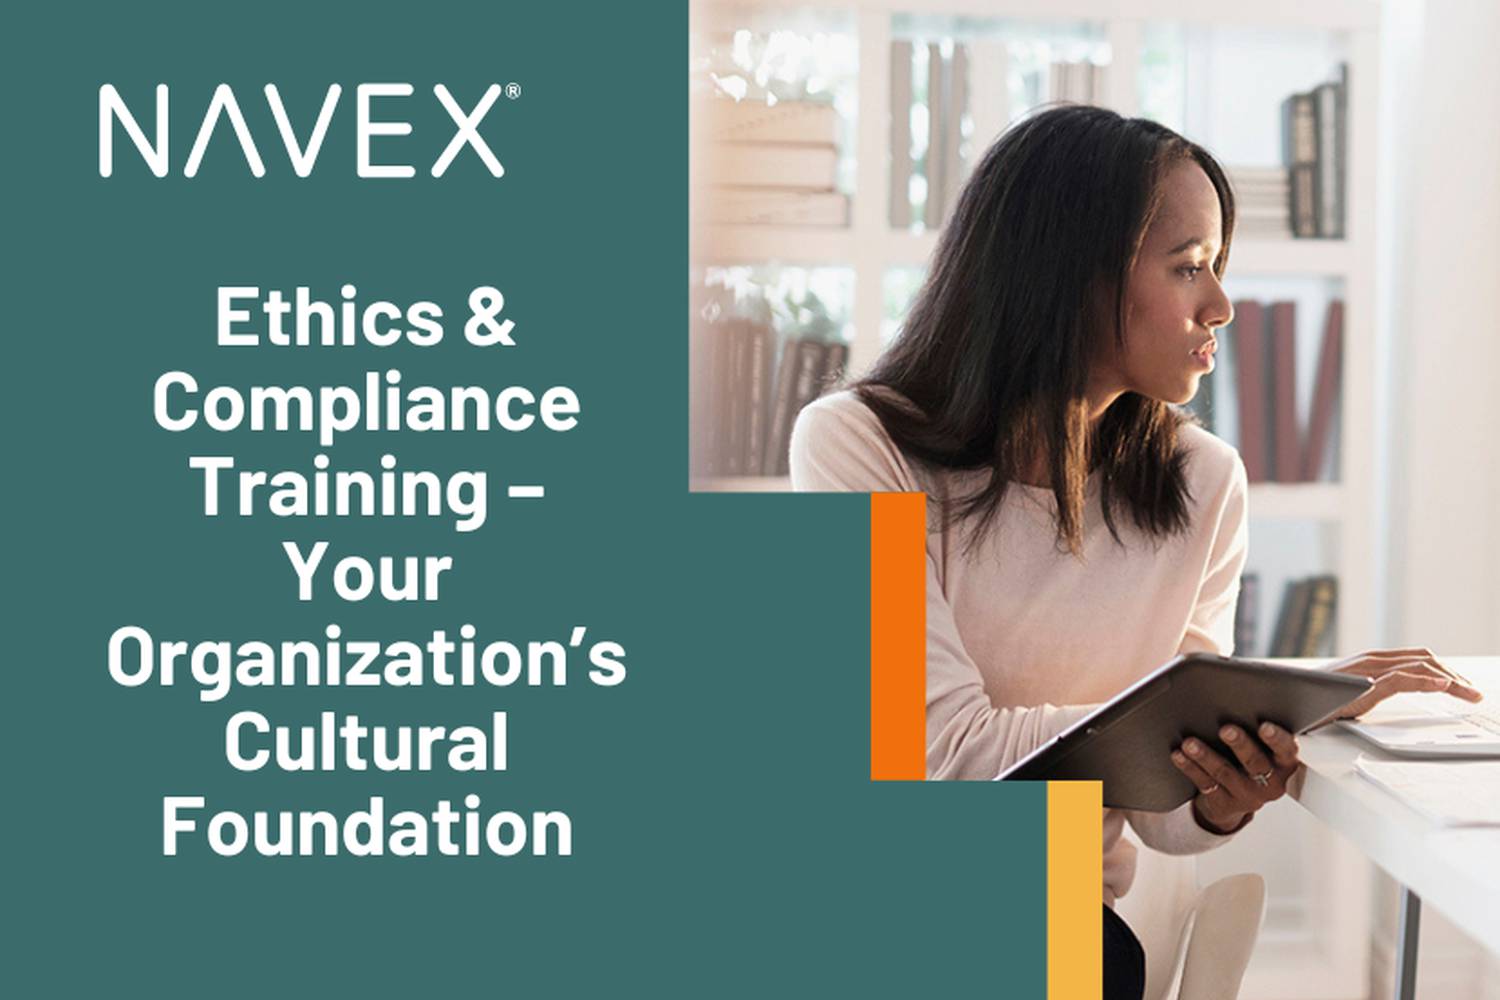 [Ethics & Compliance Training – Your Organization’s Cultural Foundation](/blog/article/ethics-compliance-training-your-organizations-cultural-foundation/)